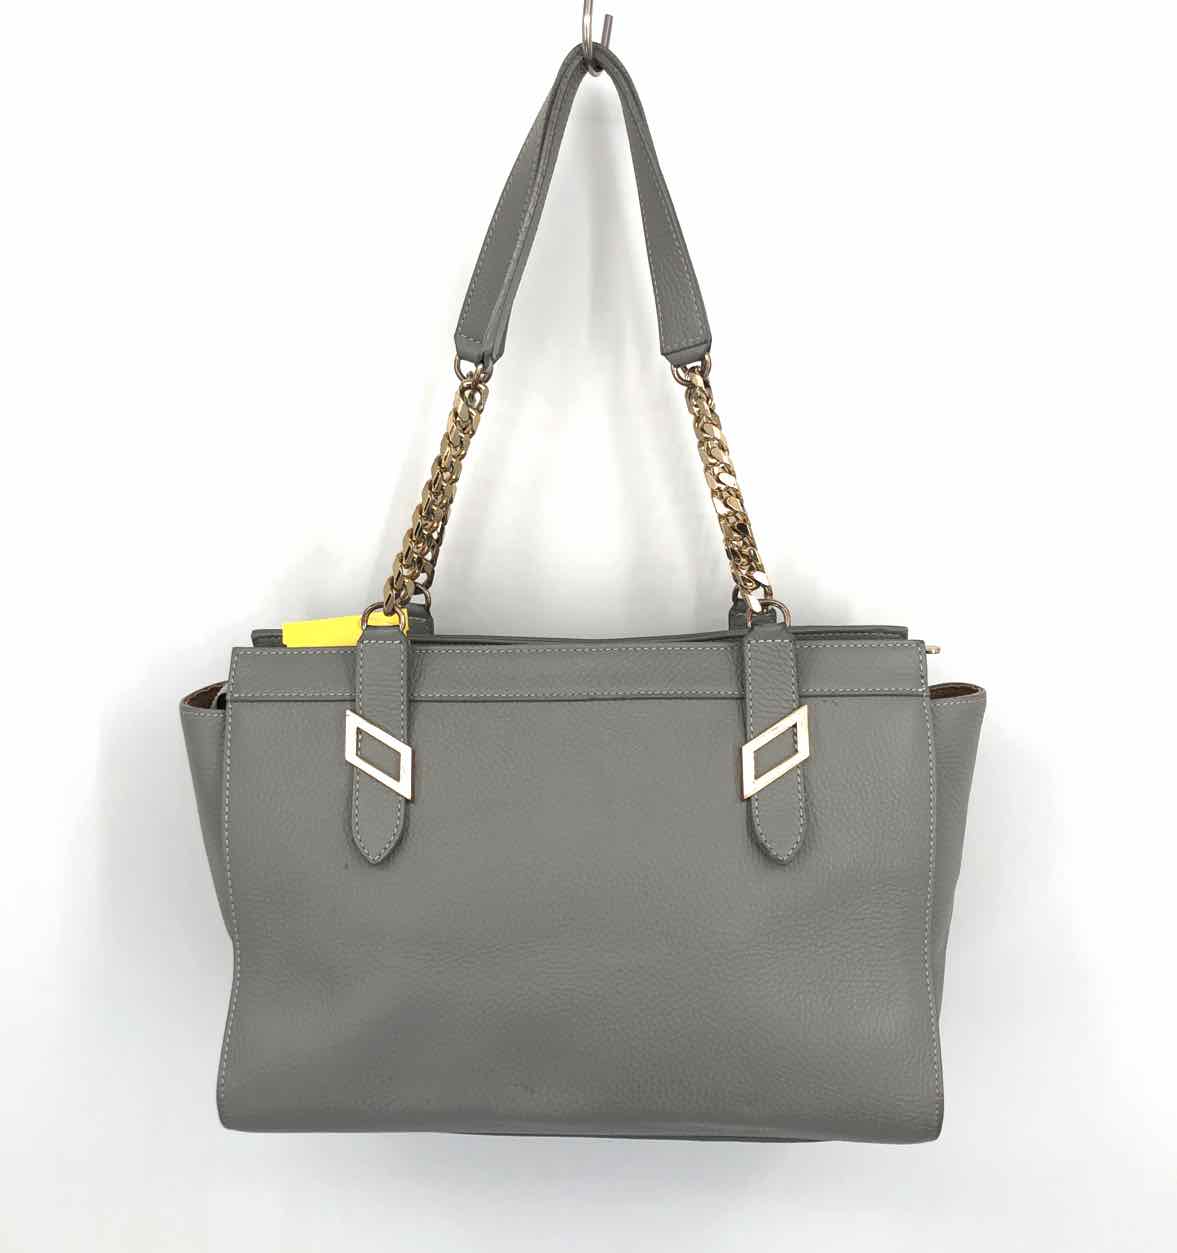 HENNESSY Grey Leather N/S Two Way Tote Messenger Purse-Near Mint | eBay